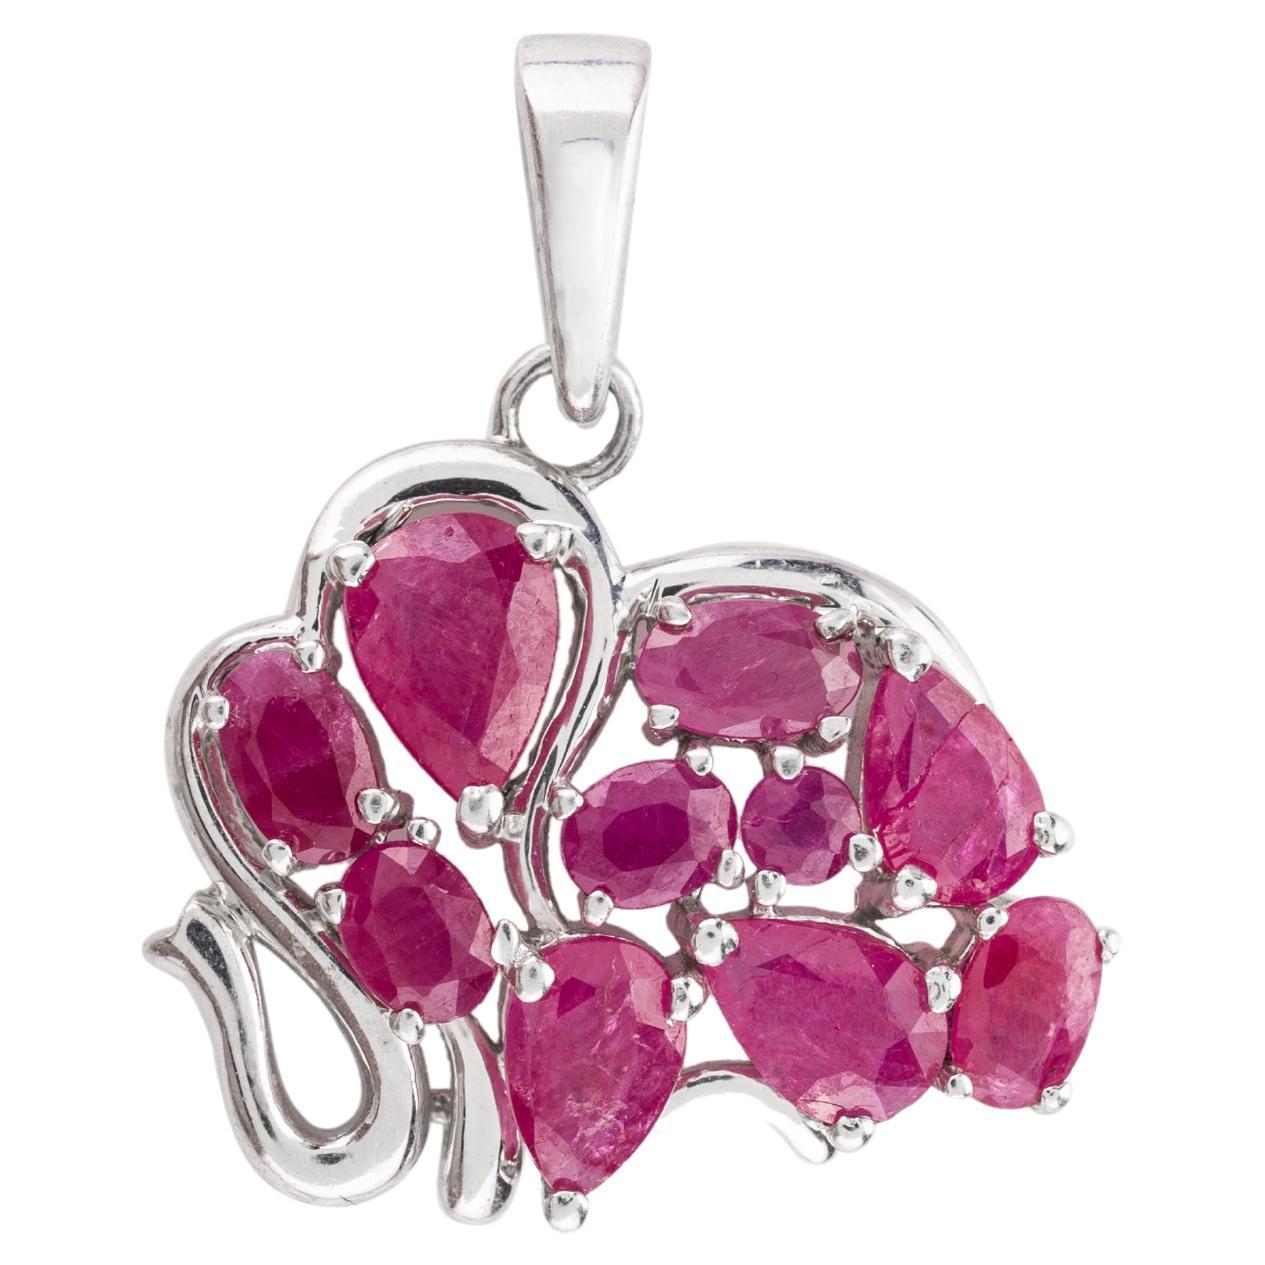 Ruby Birthstone Sterling Silver Elephant Pendant Gifts, 925 Silver Jewelry For Sale